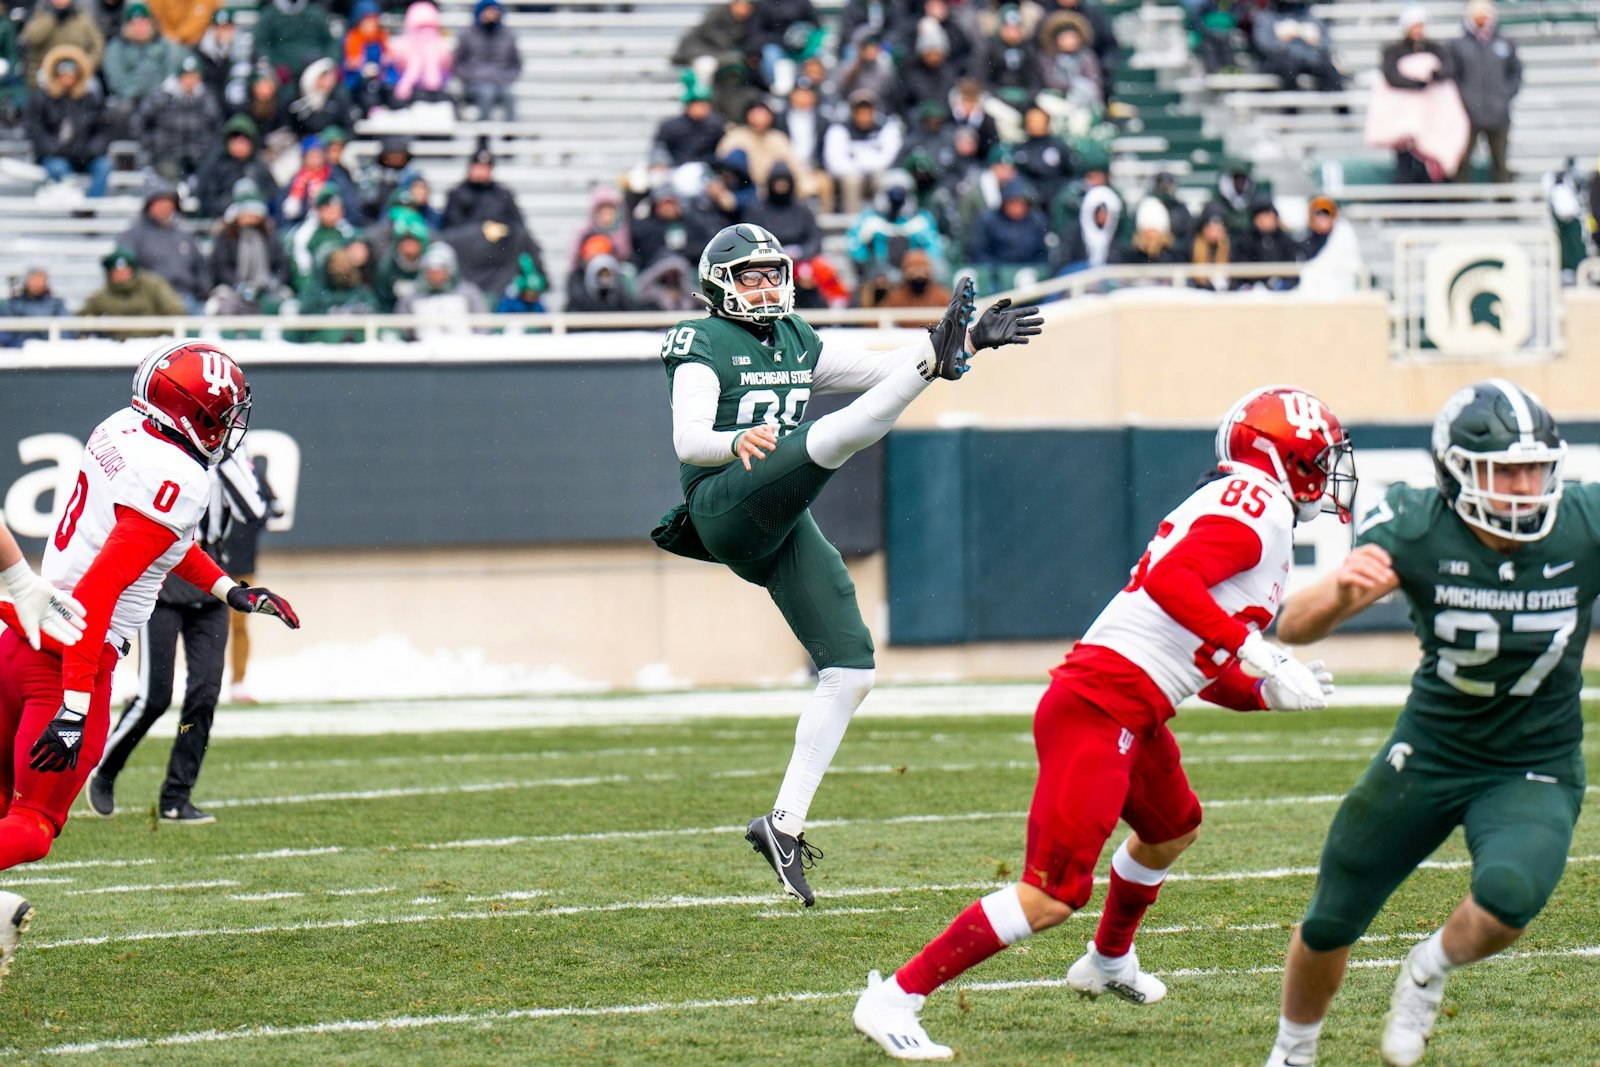 Baringer, a walk-on player, developed into the Big Ten conference’s best punter by the time he was a red-shirt senior in 2021.